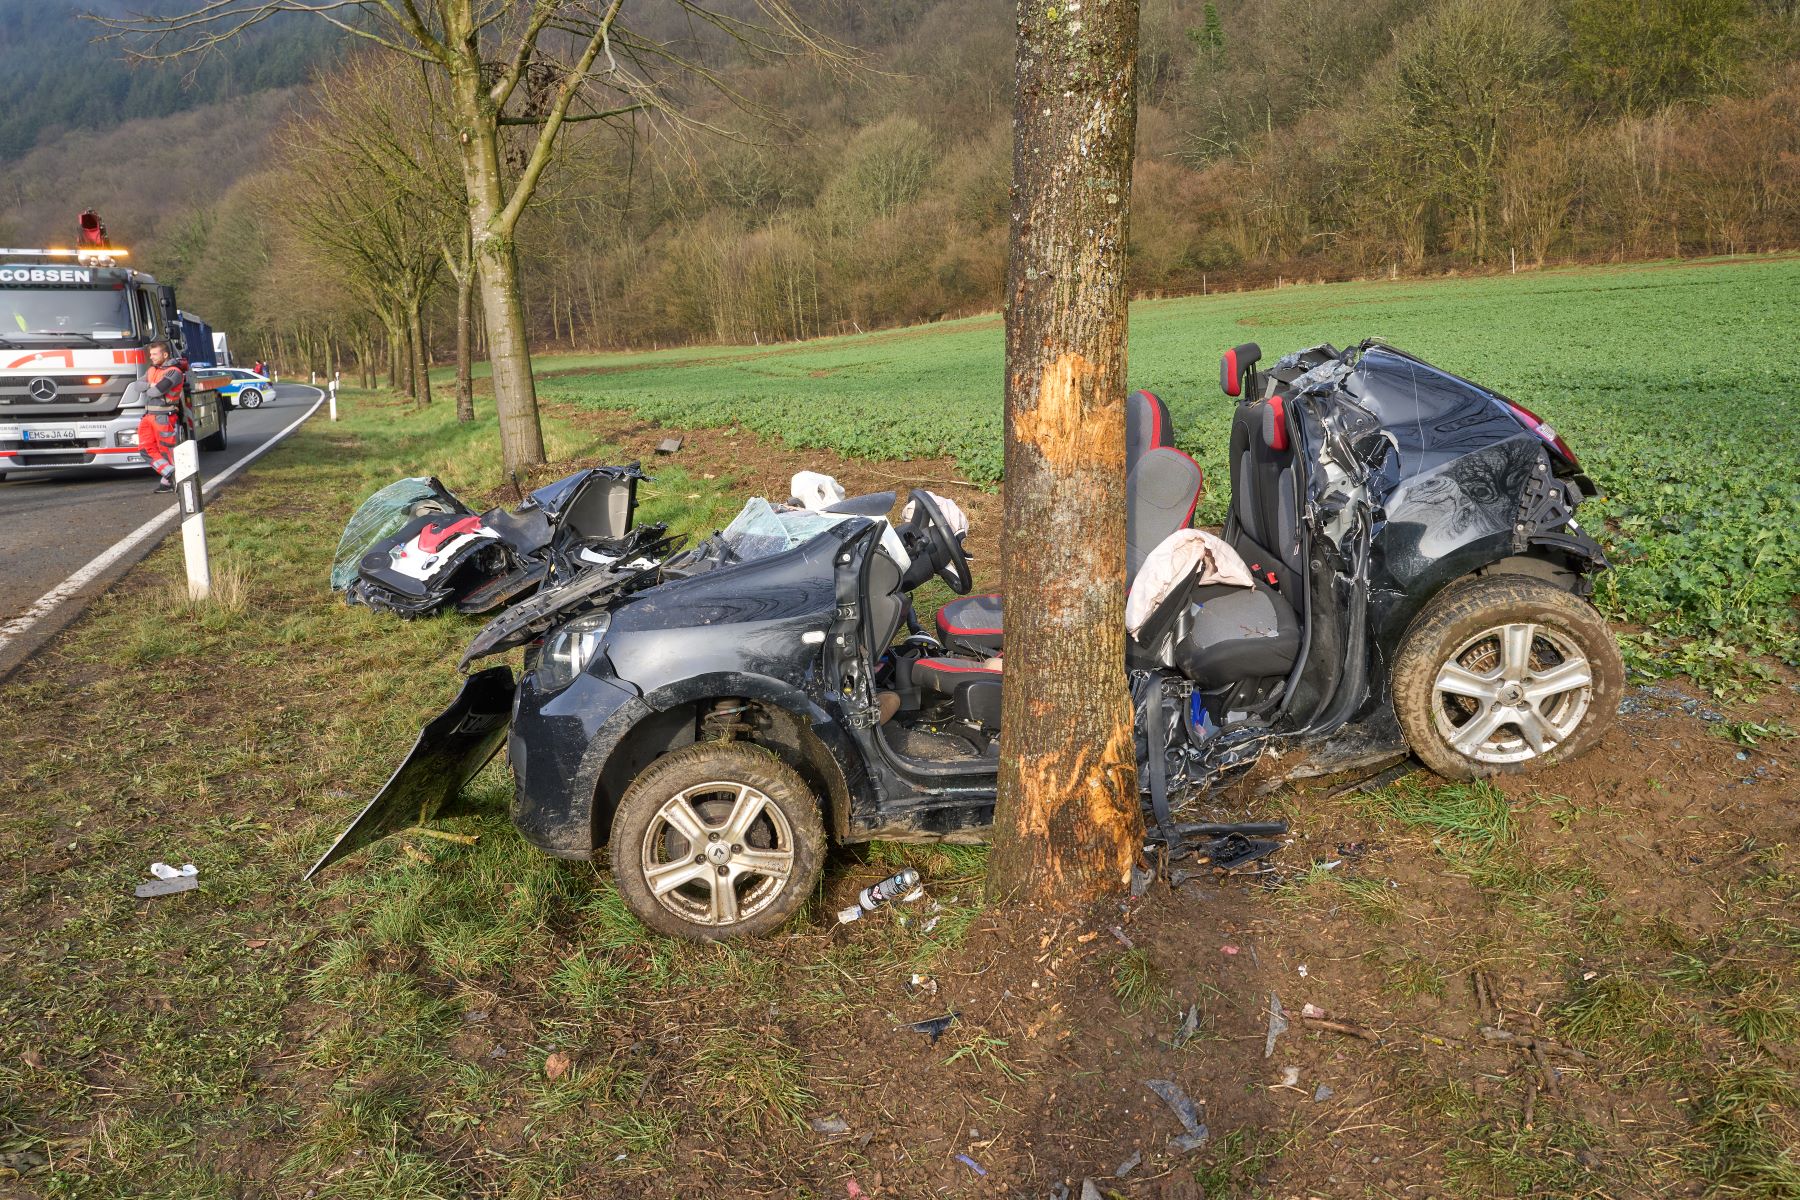 The aftermath of a car accident hitting a tree in Rhineland-Palatinate, Fachbach